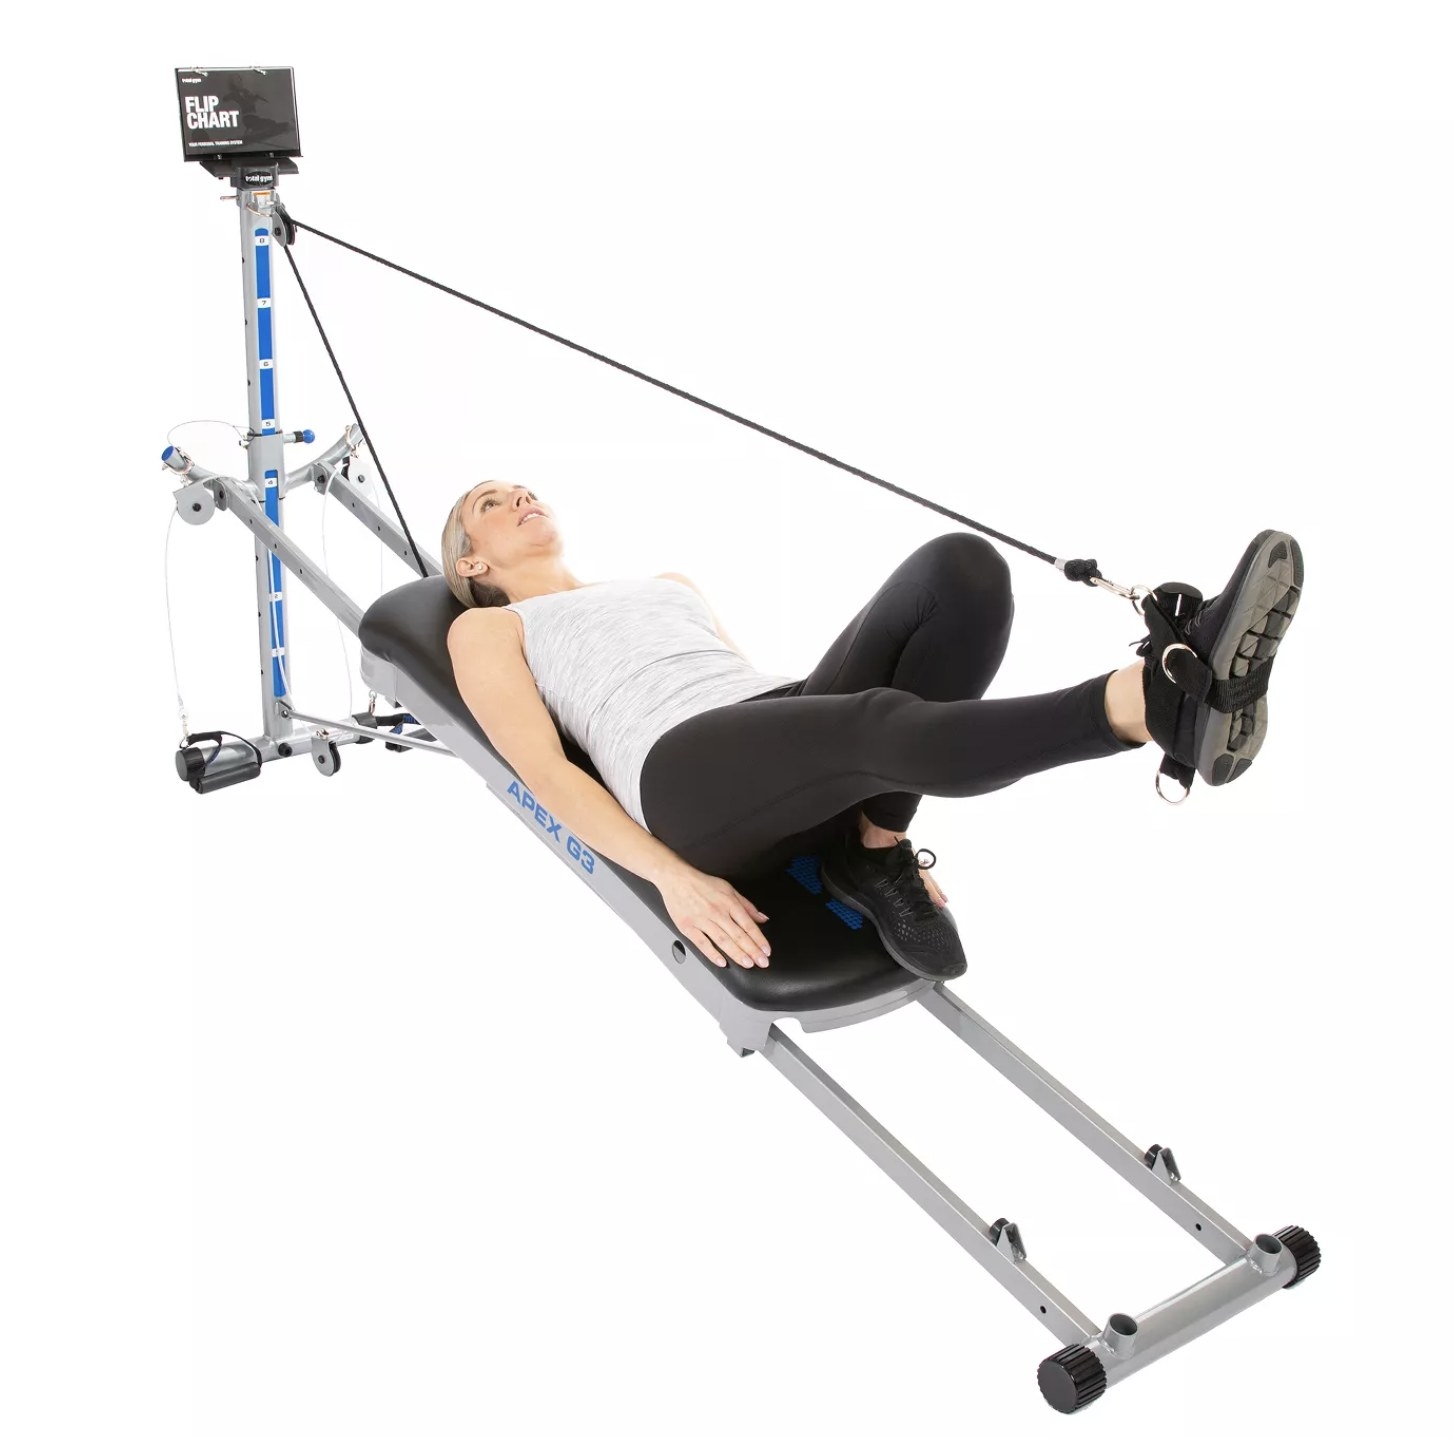 A person using the indoor workout equipment